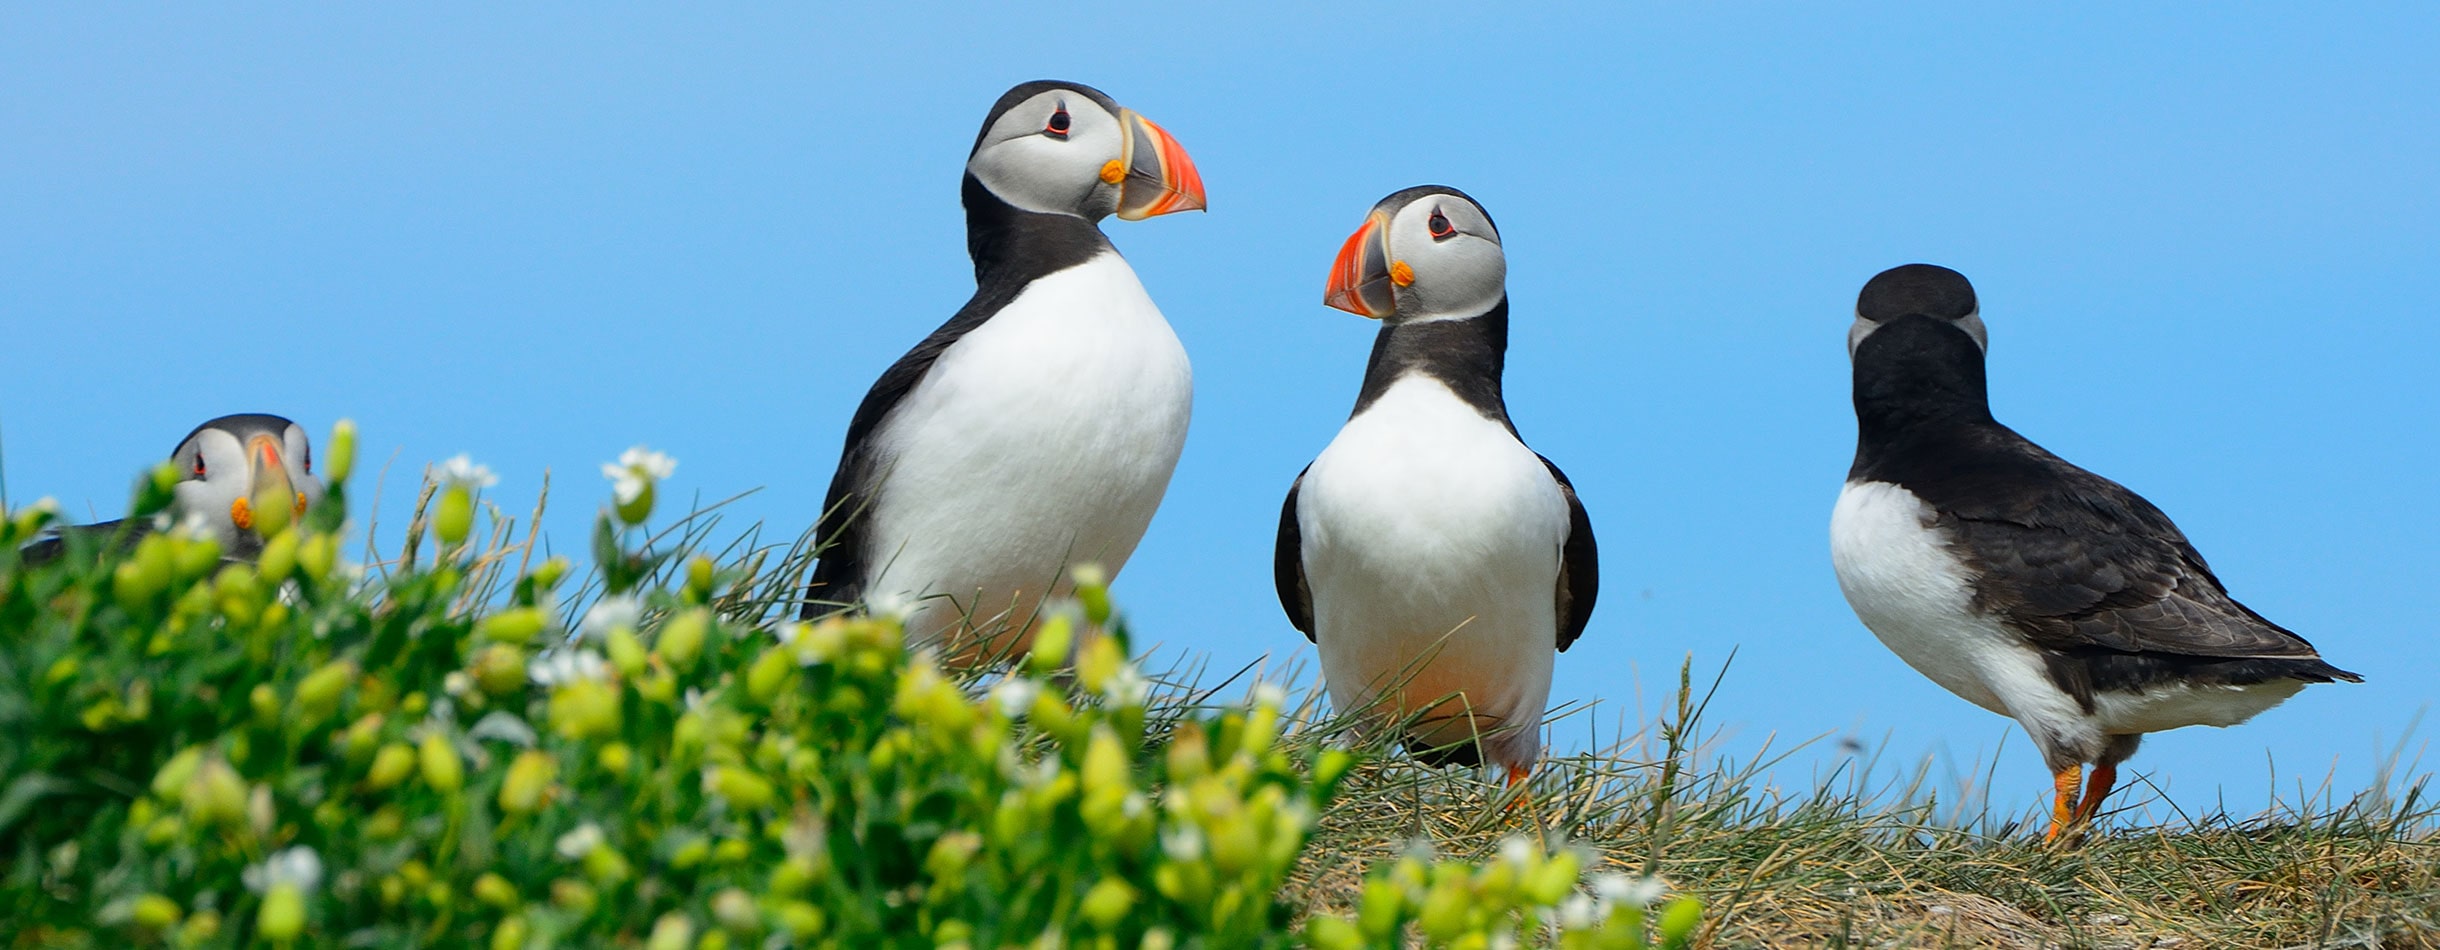 Colony of Puffins, Scotland